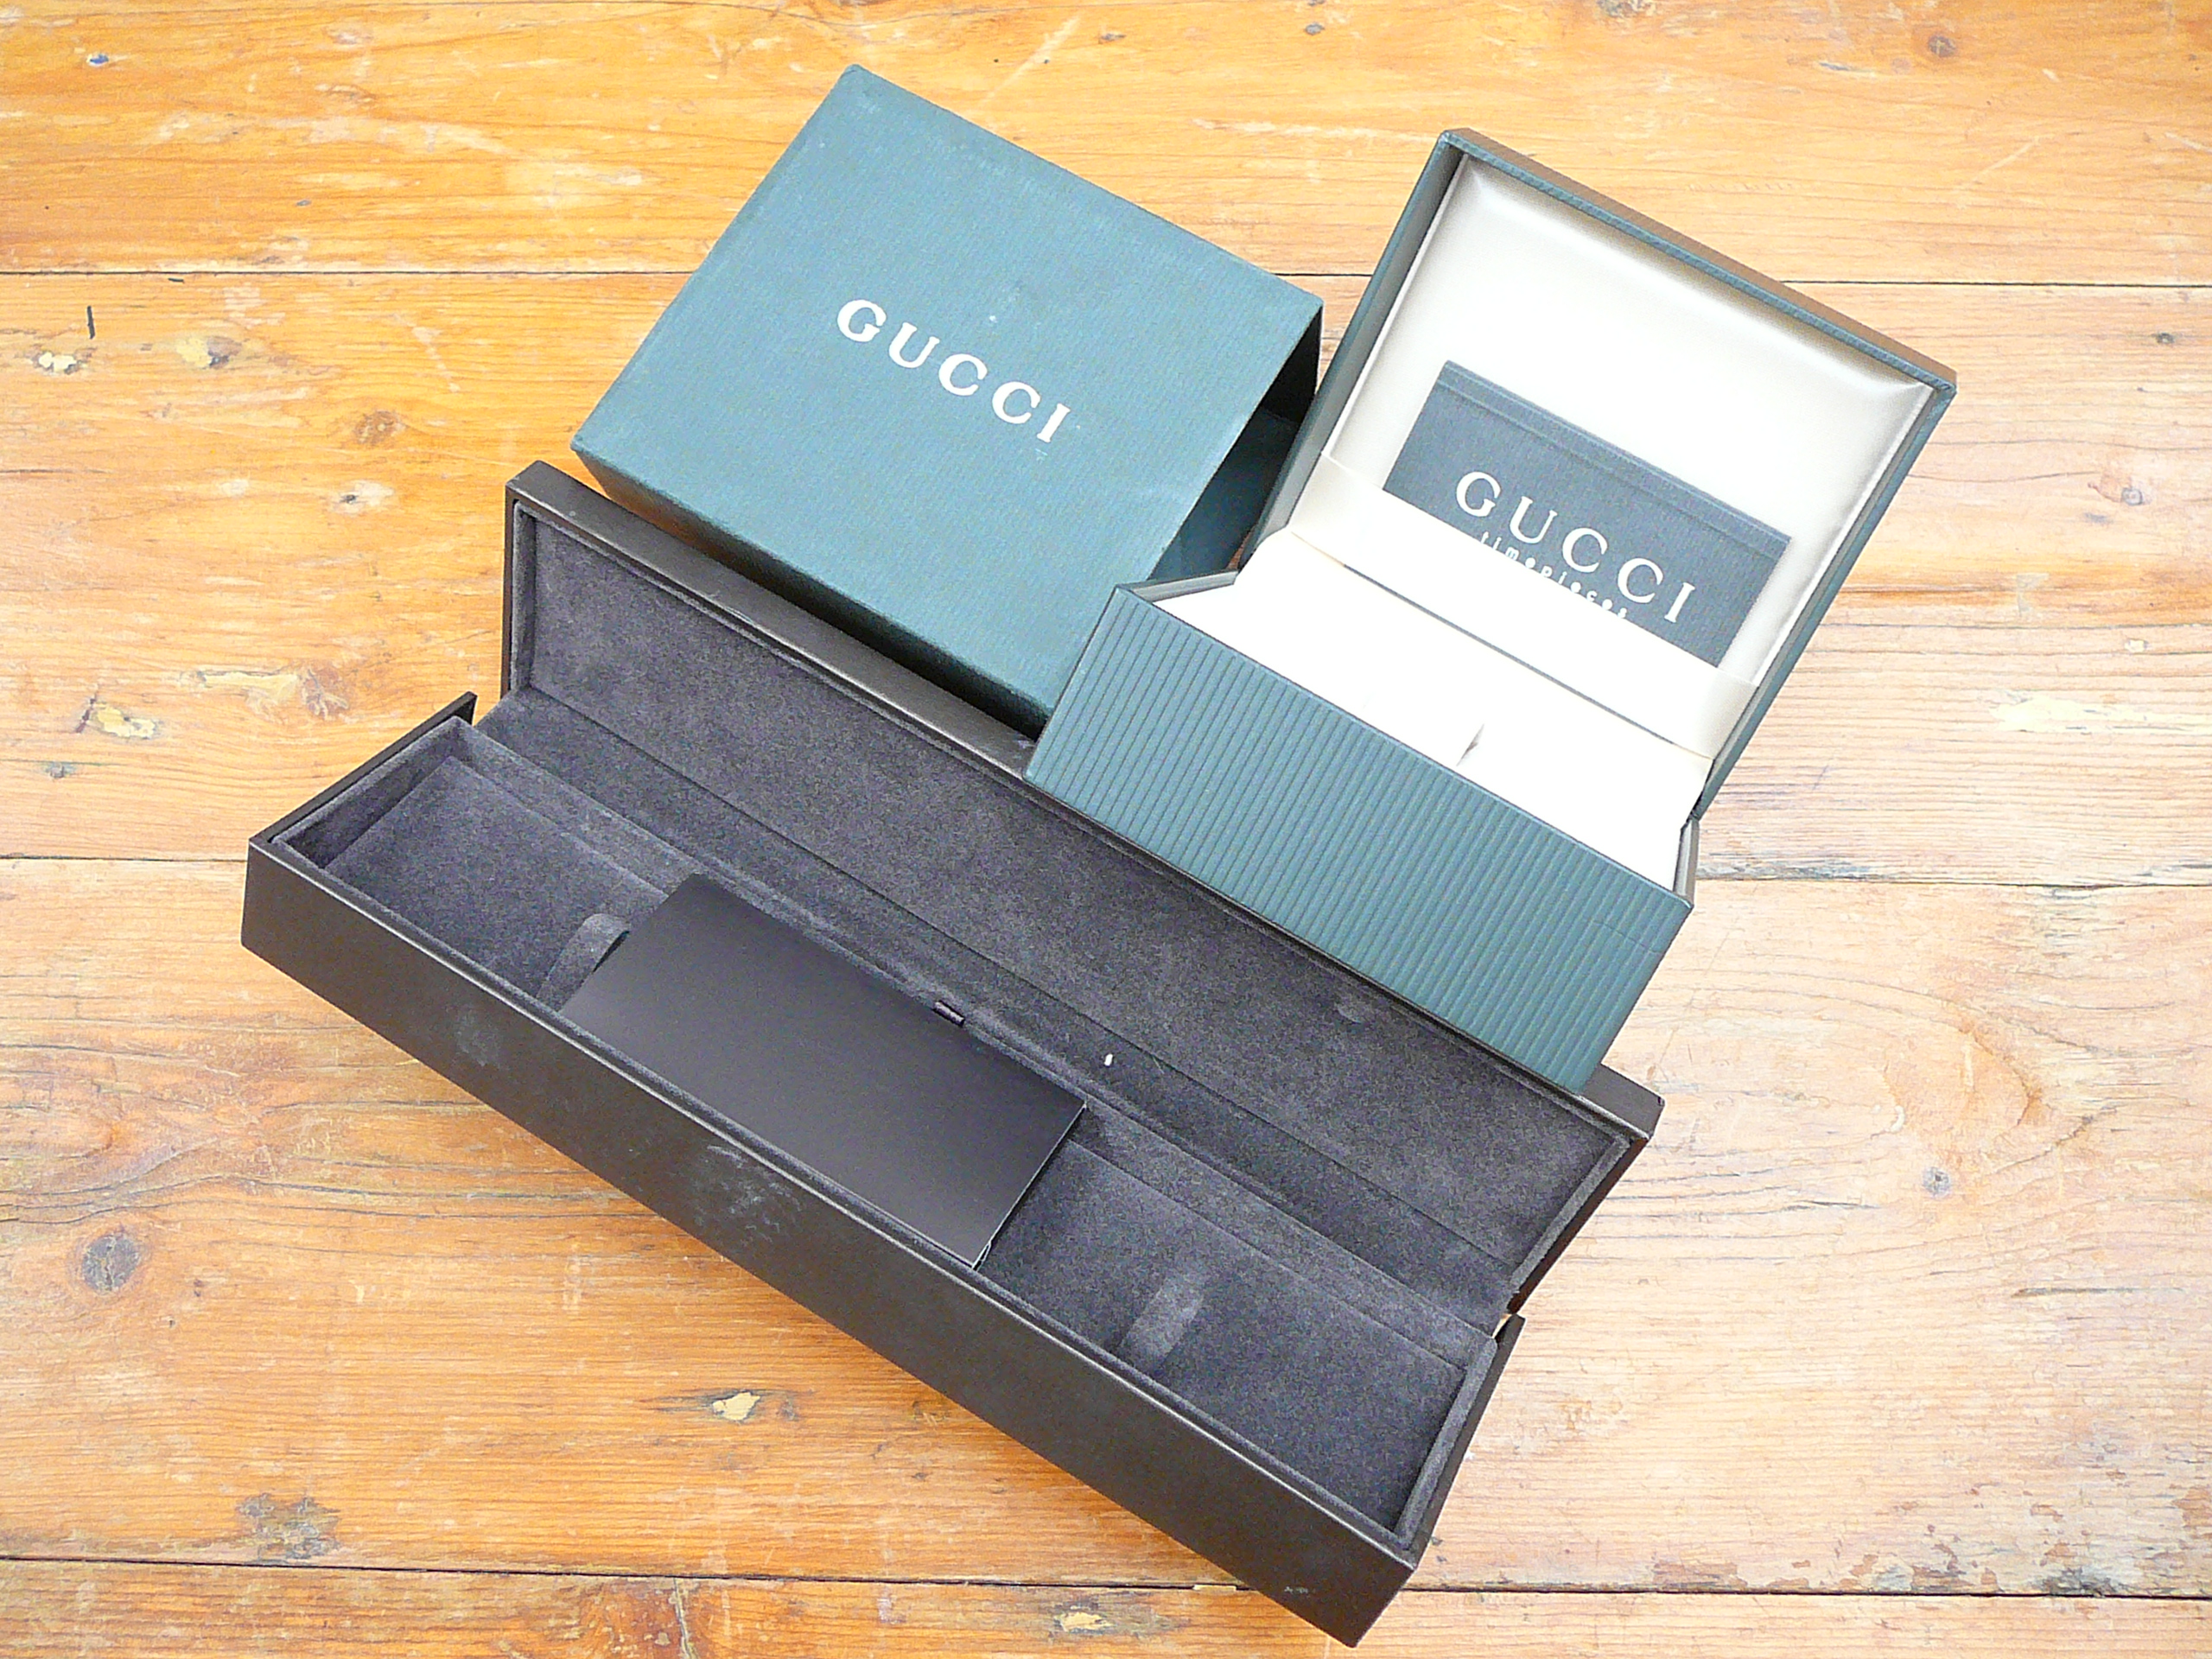 Gucci watch boxes